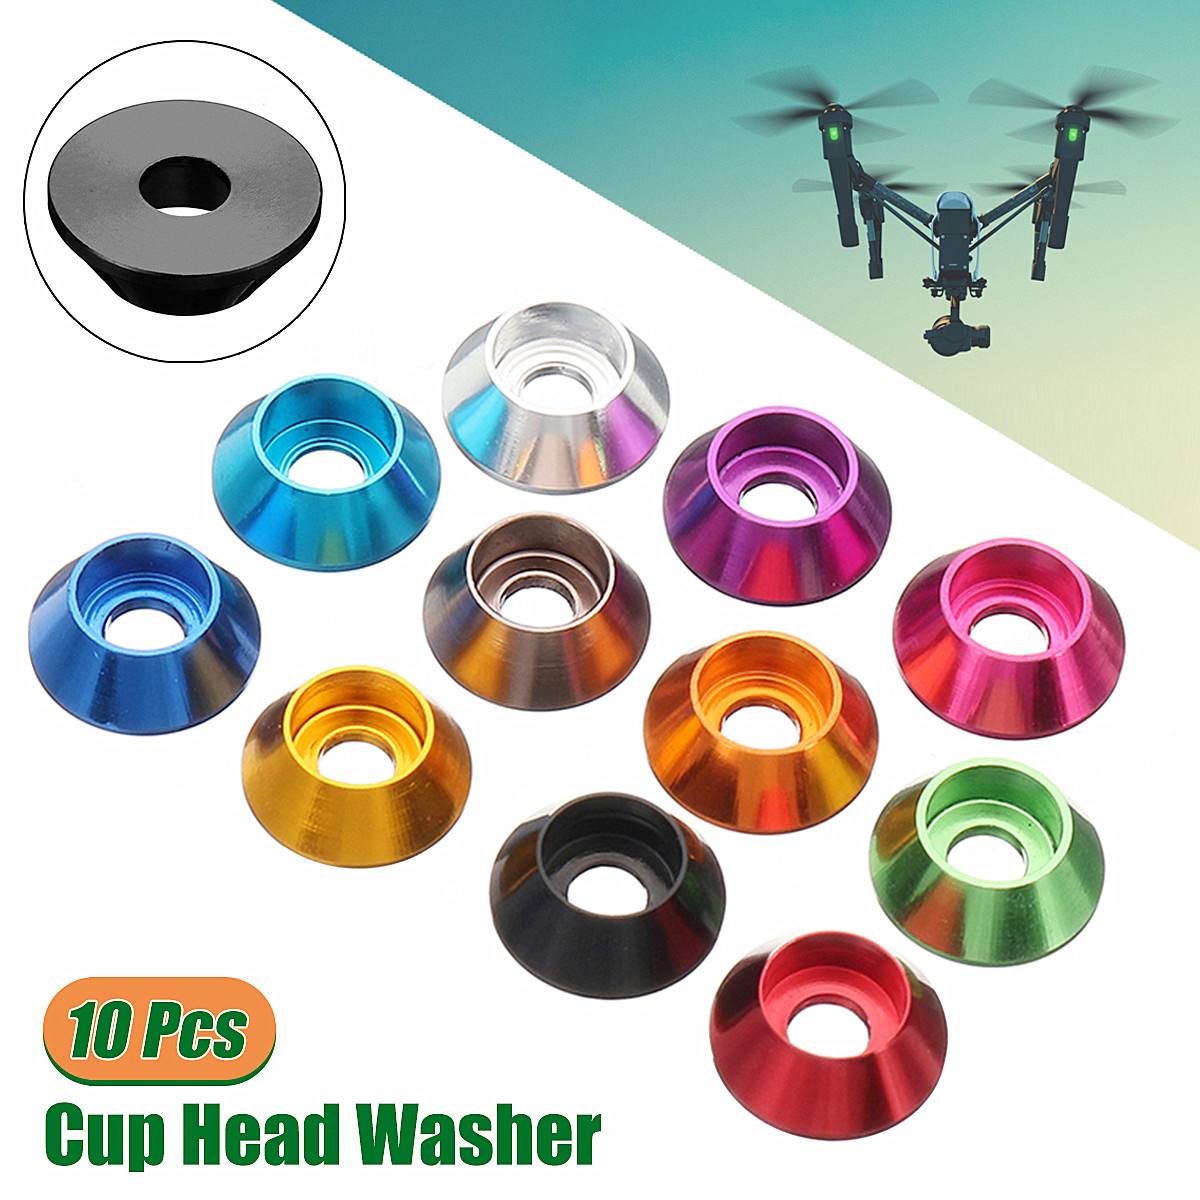 Sulevetrade-M5AN2-10Pcs-M5-Cup-Head-Hex-Screw-Gasket-Washer-Nuts-Aluminum-Alloy-Multicolor-1535744-1